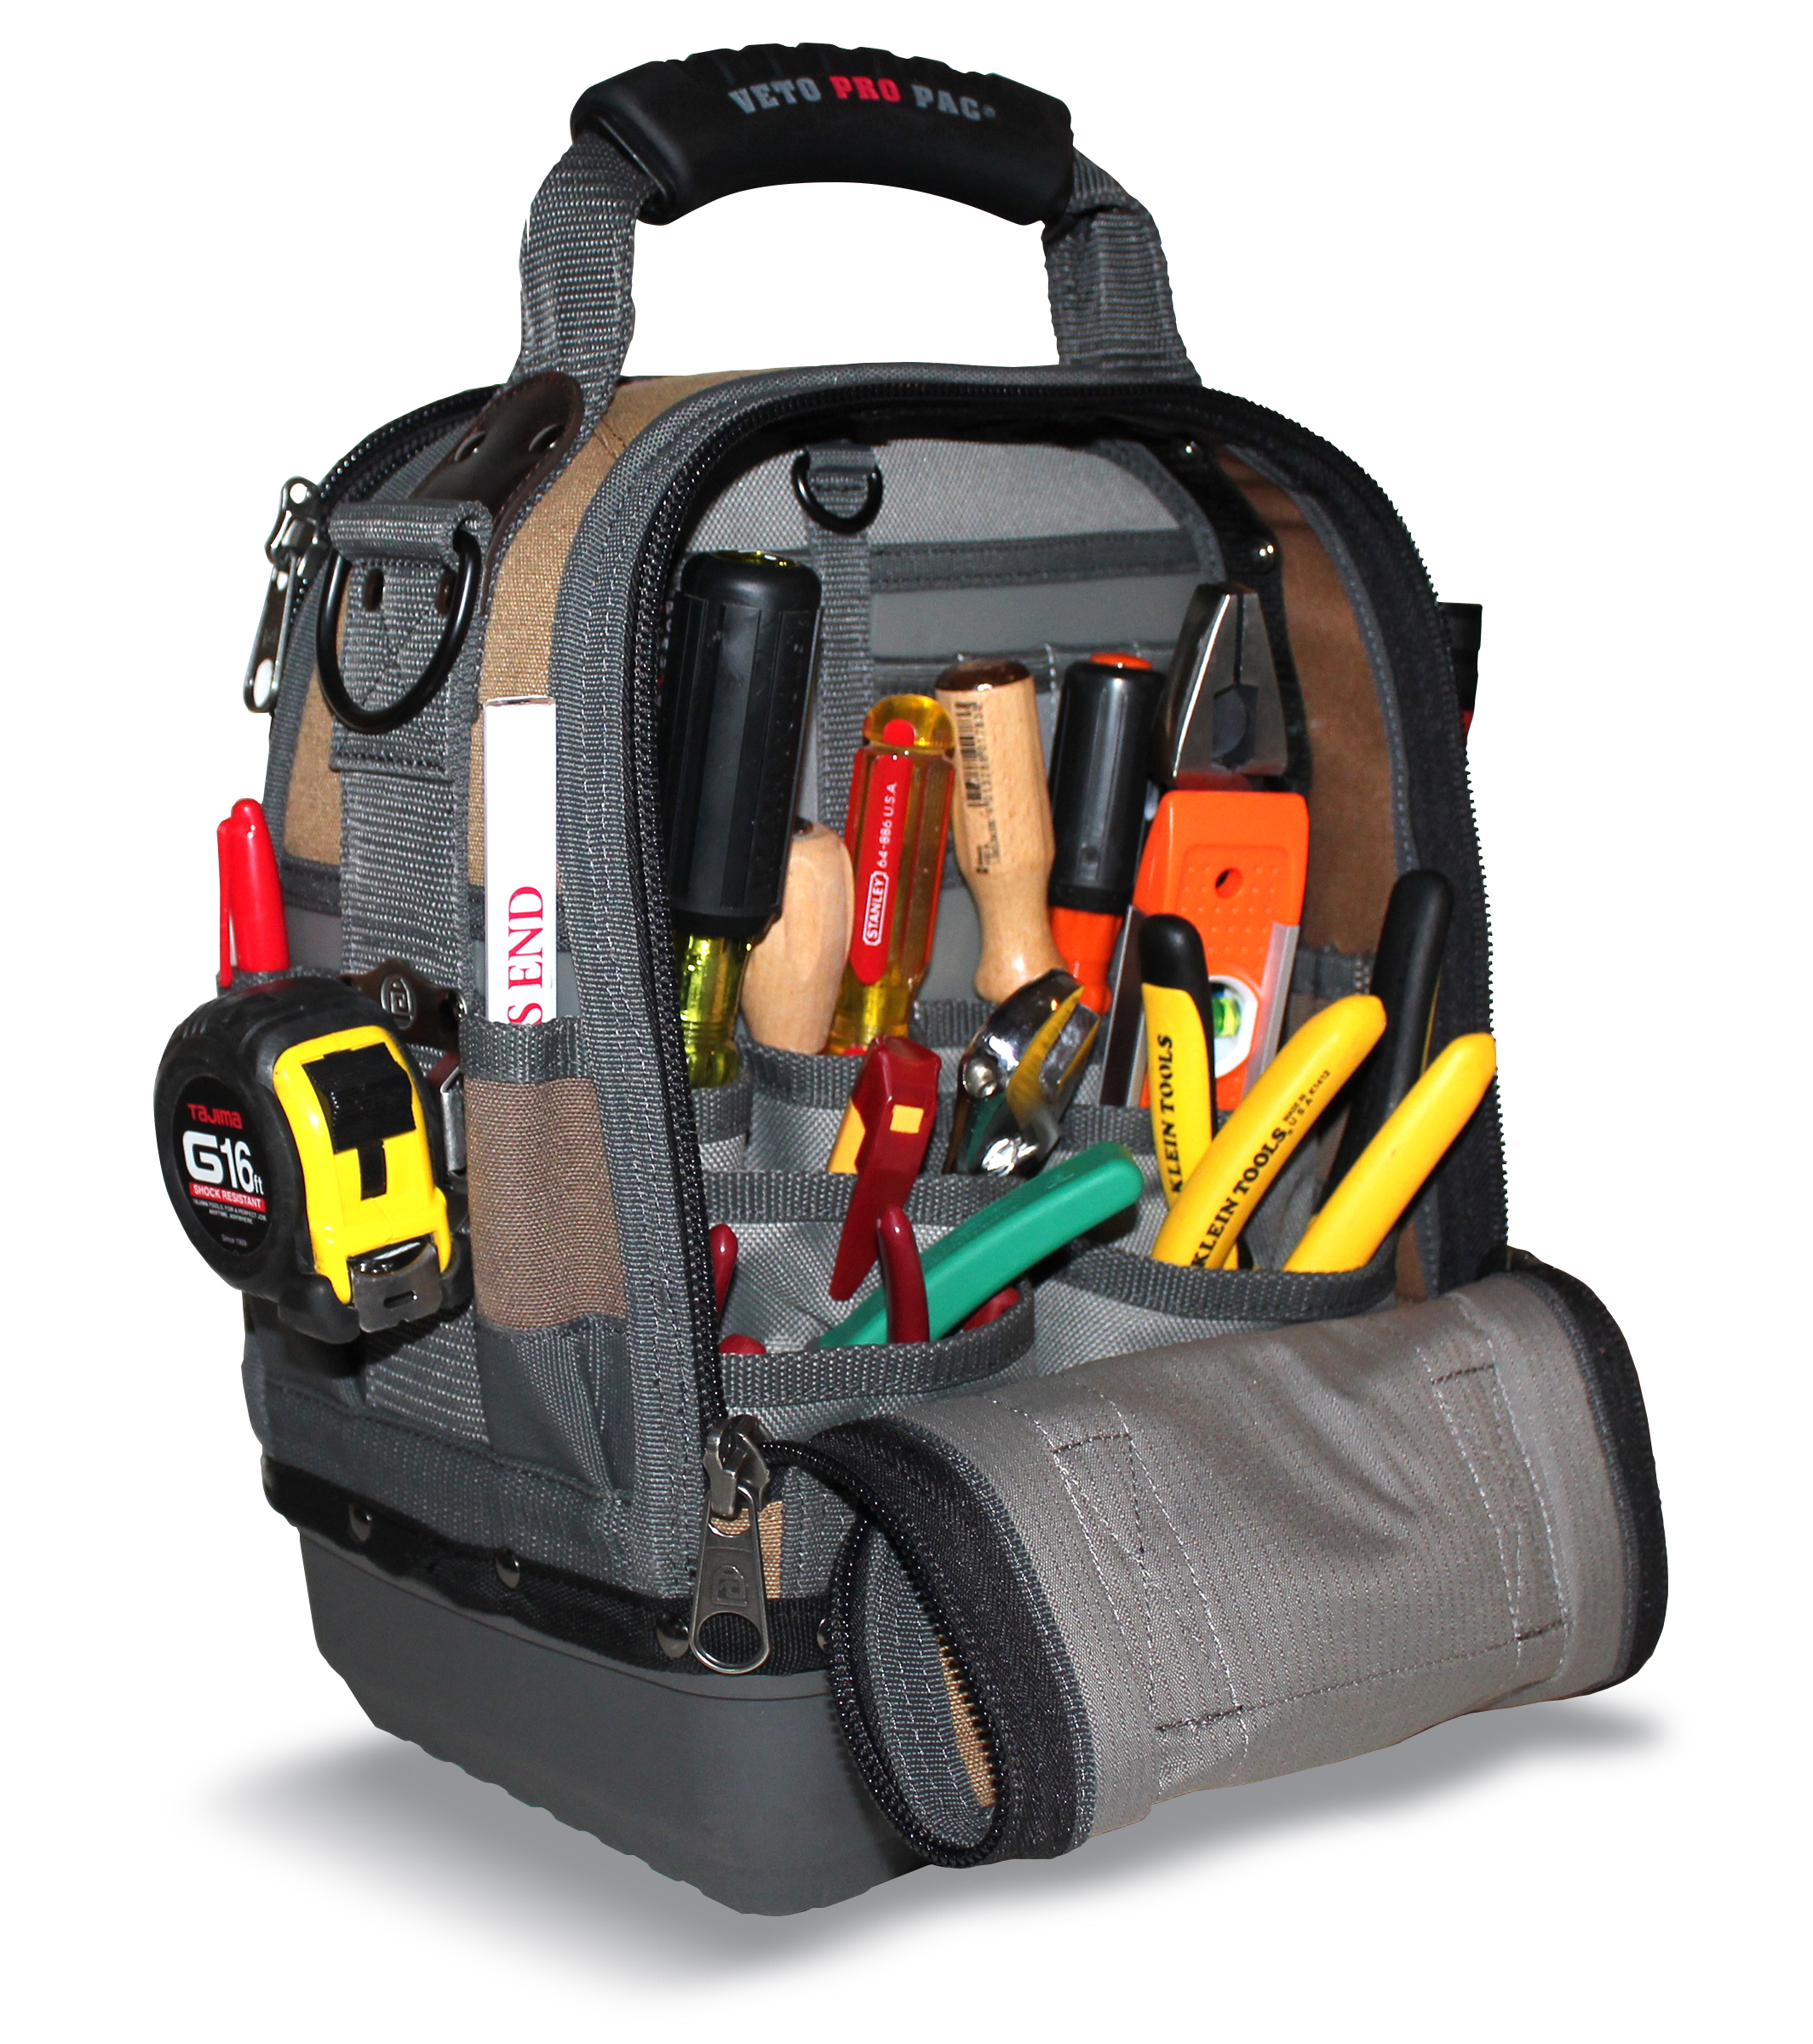 Veto Pro Pac MB-MCT Compact Tool Bag with Rubber India